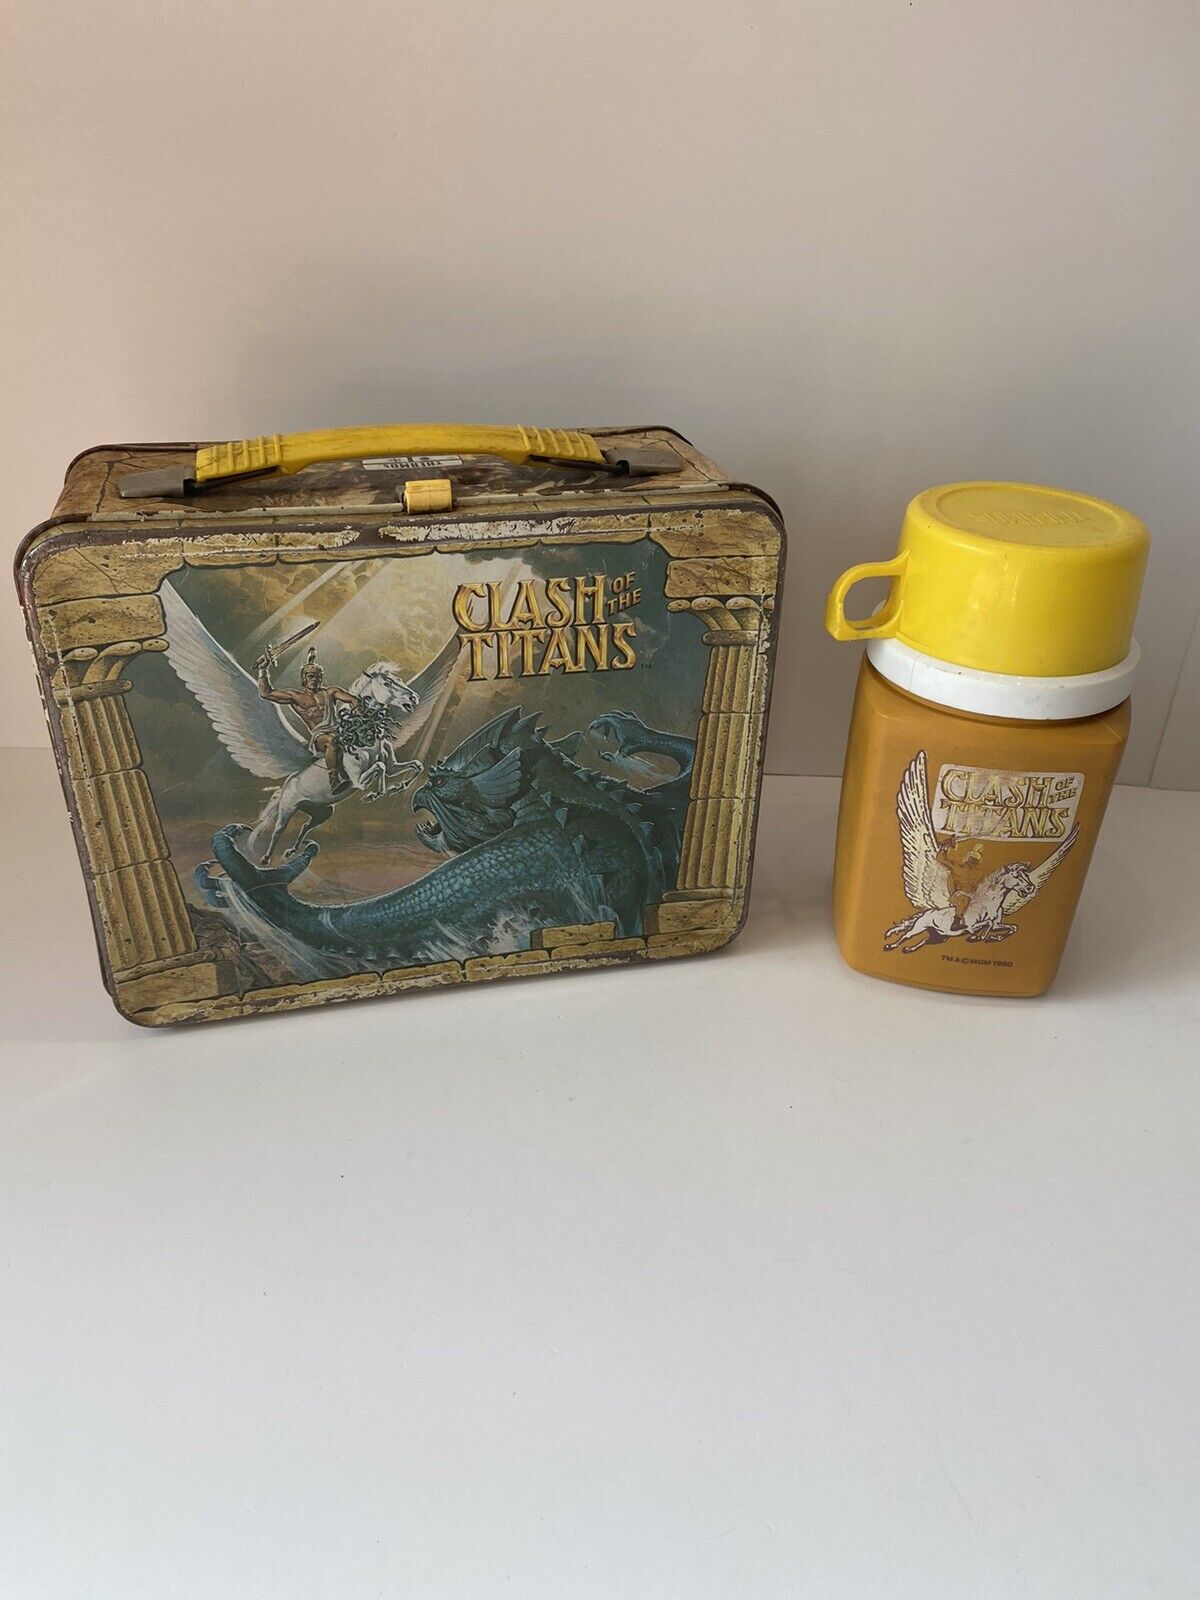 Vintage Clash of the Titans Metal Lunch Box with Thermos 1980